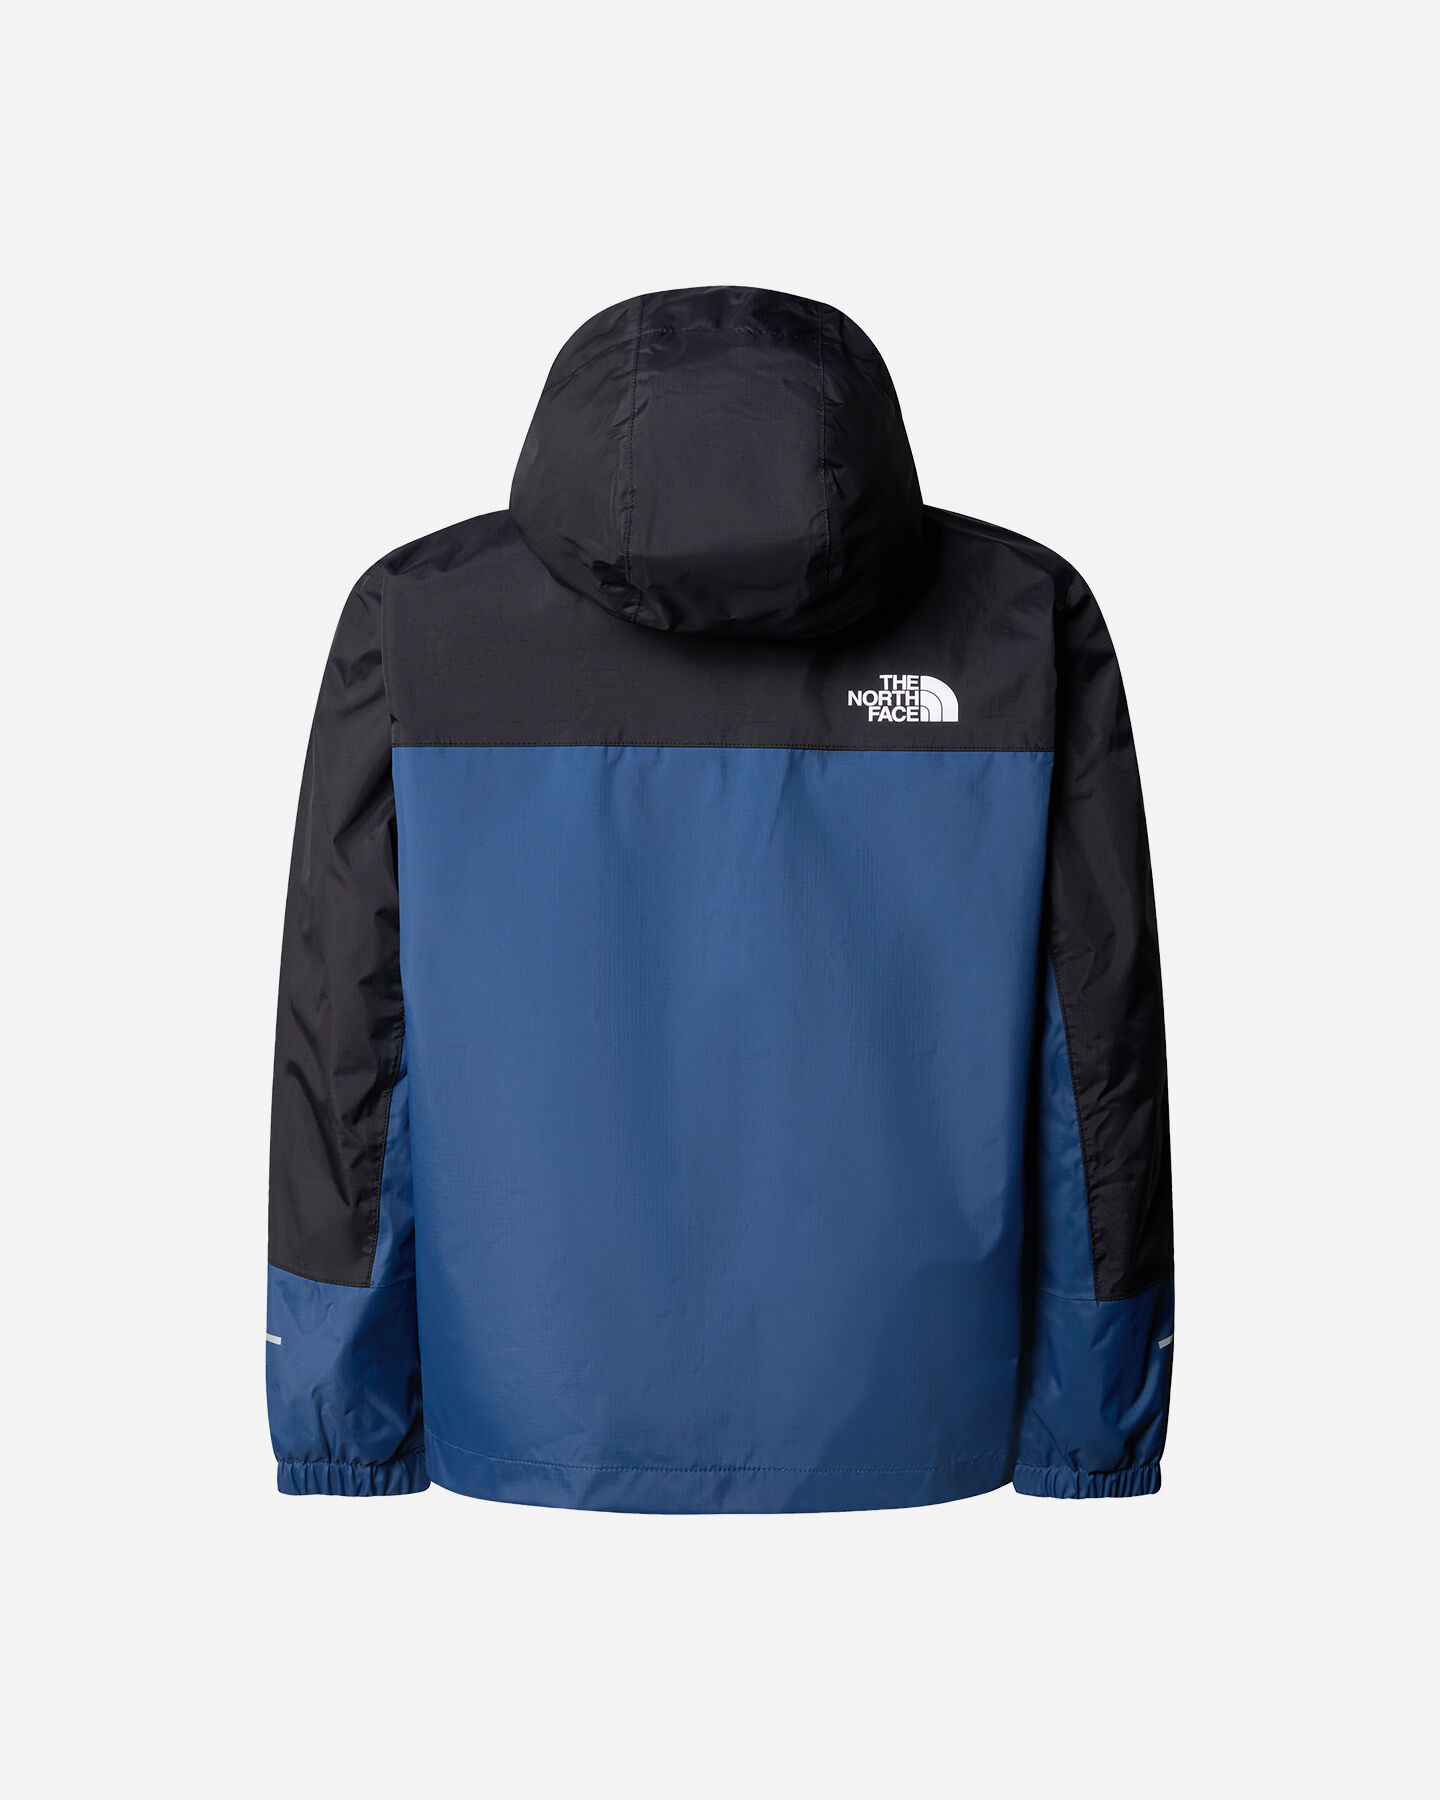  Giacca outdoor THE NORTH FACE ANTORA RAIN JR S5651426|HDC|M scatto 1